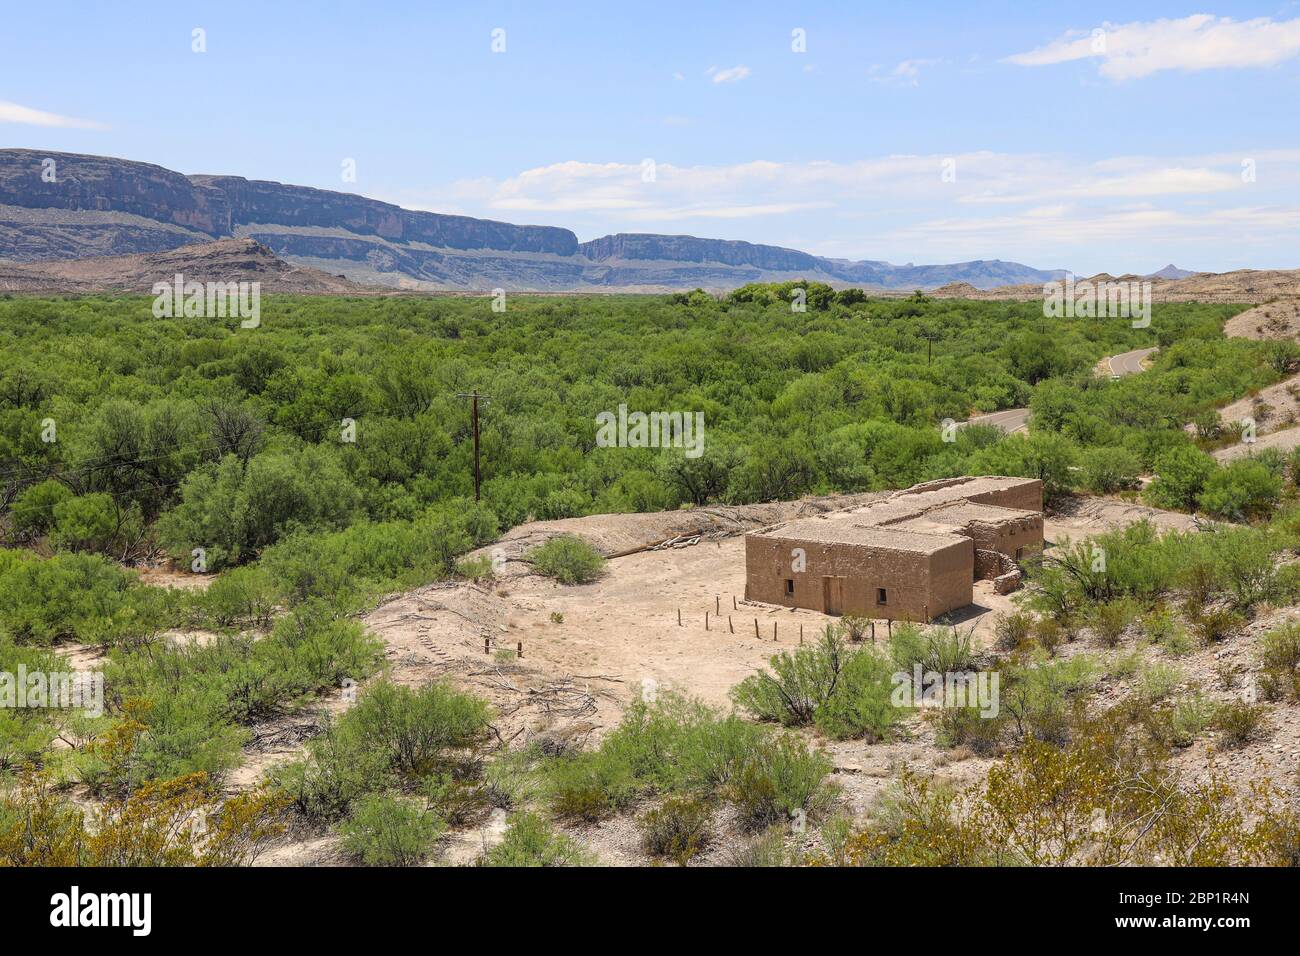 Adobe structure once used in support of farming in the Castolon area of Big Bend National Park, Texas Stock Photo